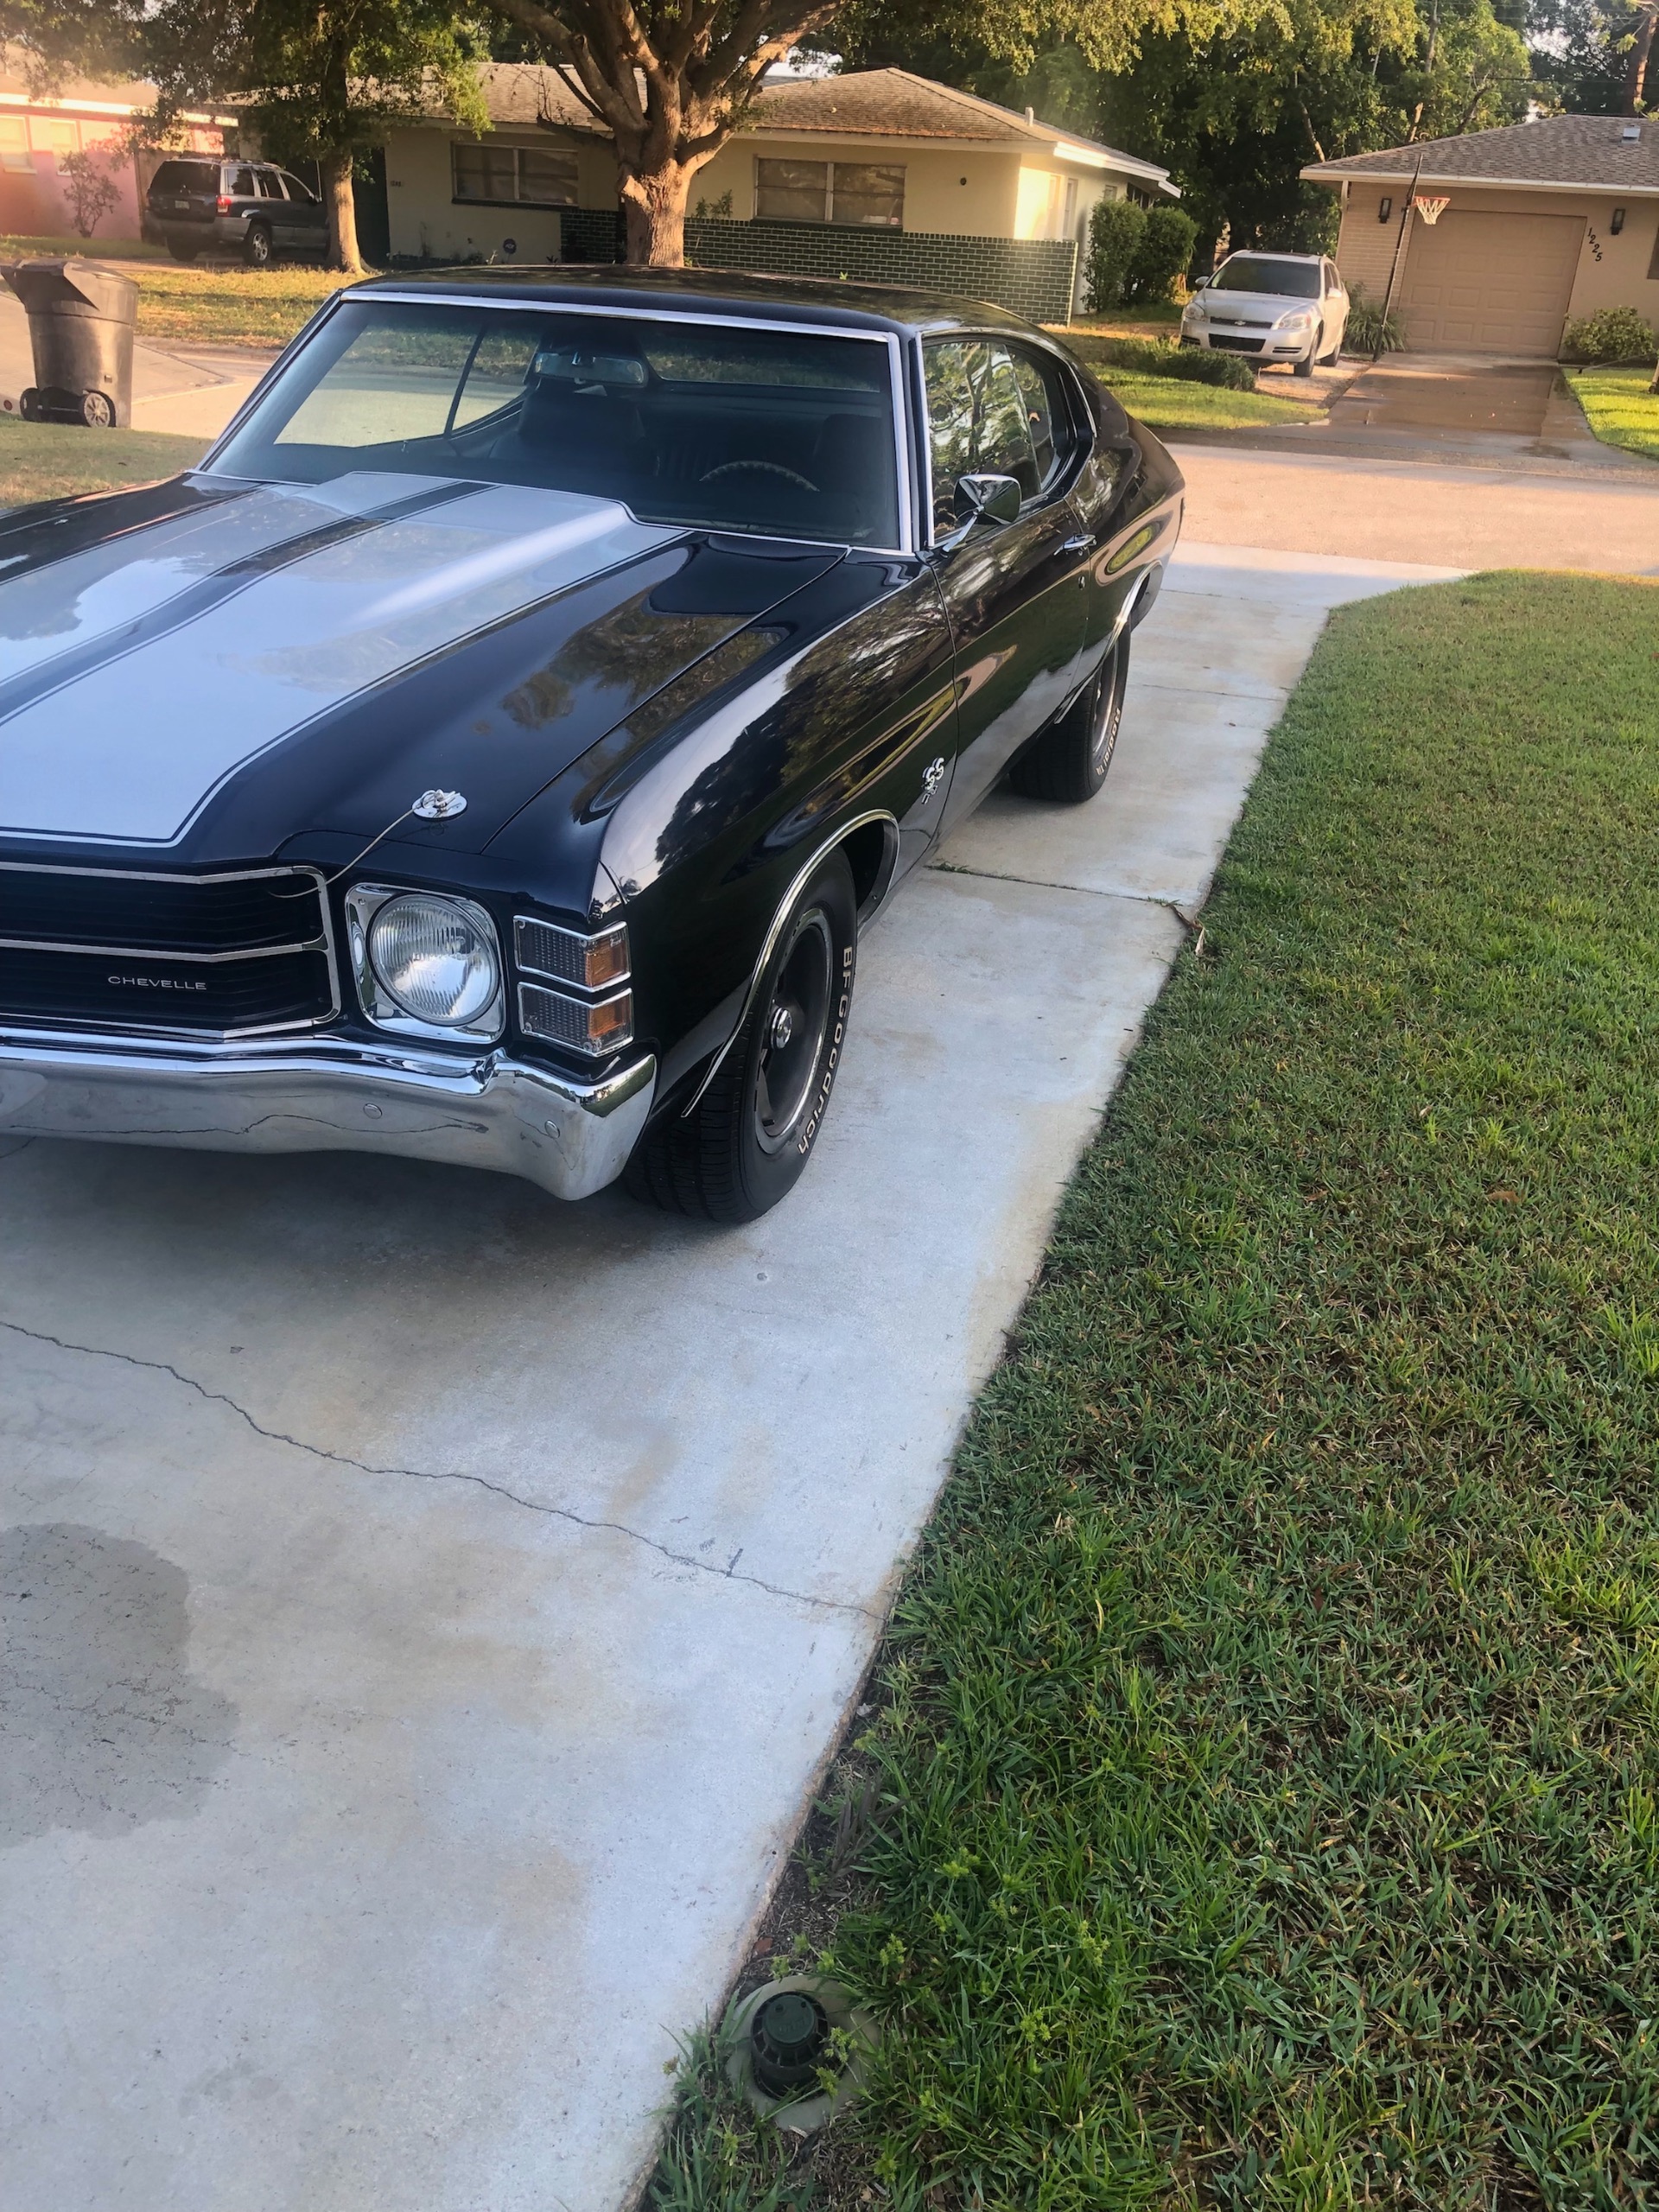 Used 1971 Chevrolet Chevelle -FRAME UP RESTORED-BIG BLOCK 454-NEW PAINT/INTERIOR-FROM FLORIDA-MUSCLE- | Mundelein, IL